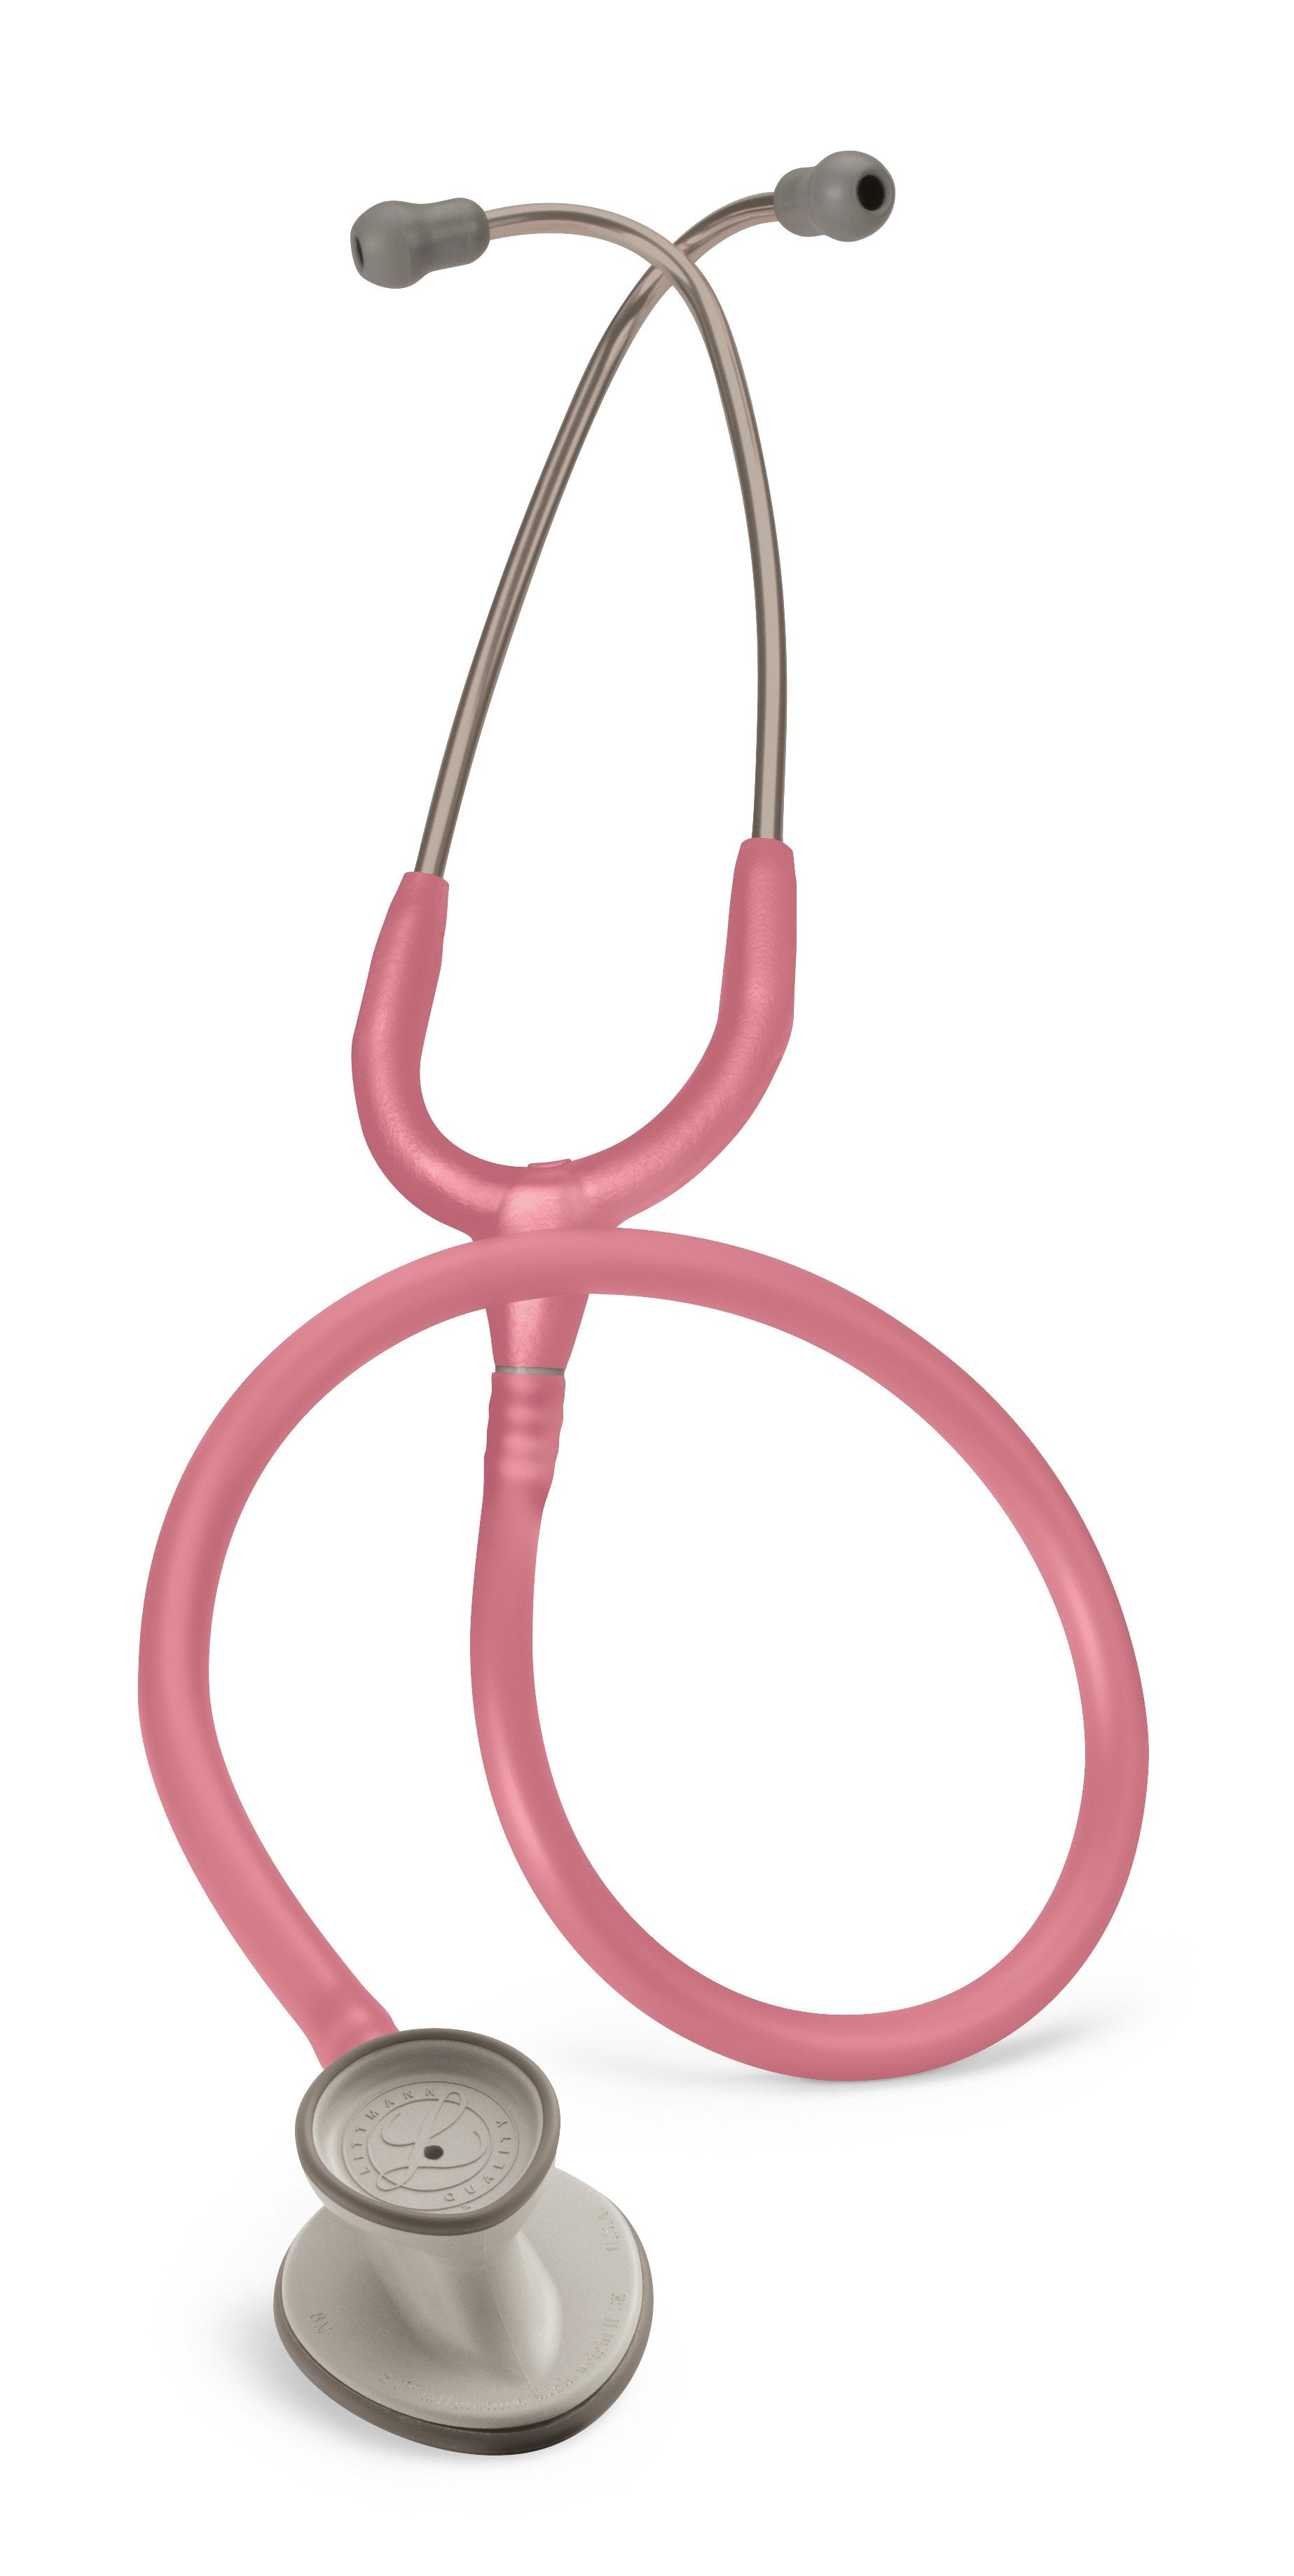 General Exam Stethoscope 3M™ Littmann® Lightweight II S.E. Pink 1-Tube 28 Inch Tube Double Sided Chestpiece